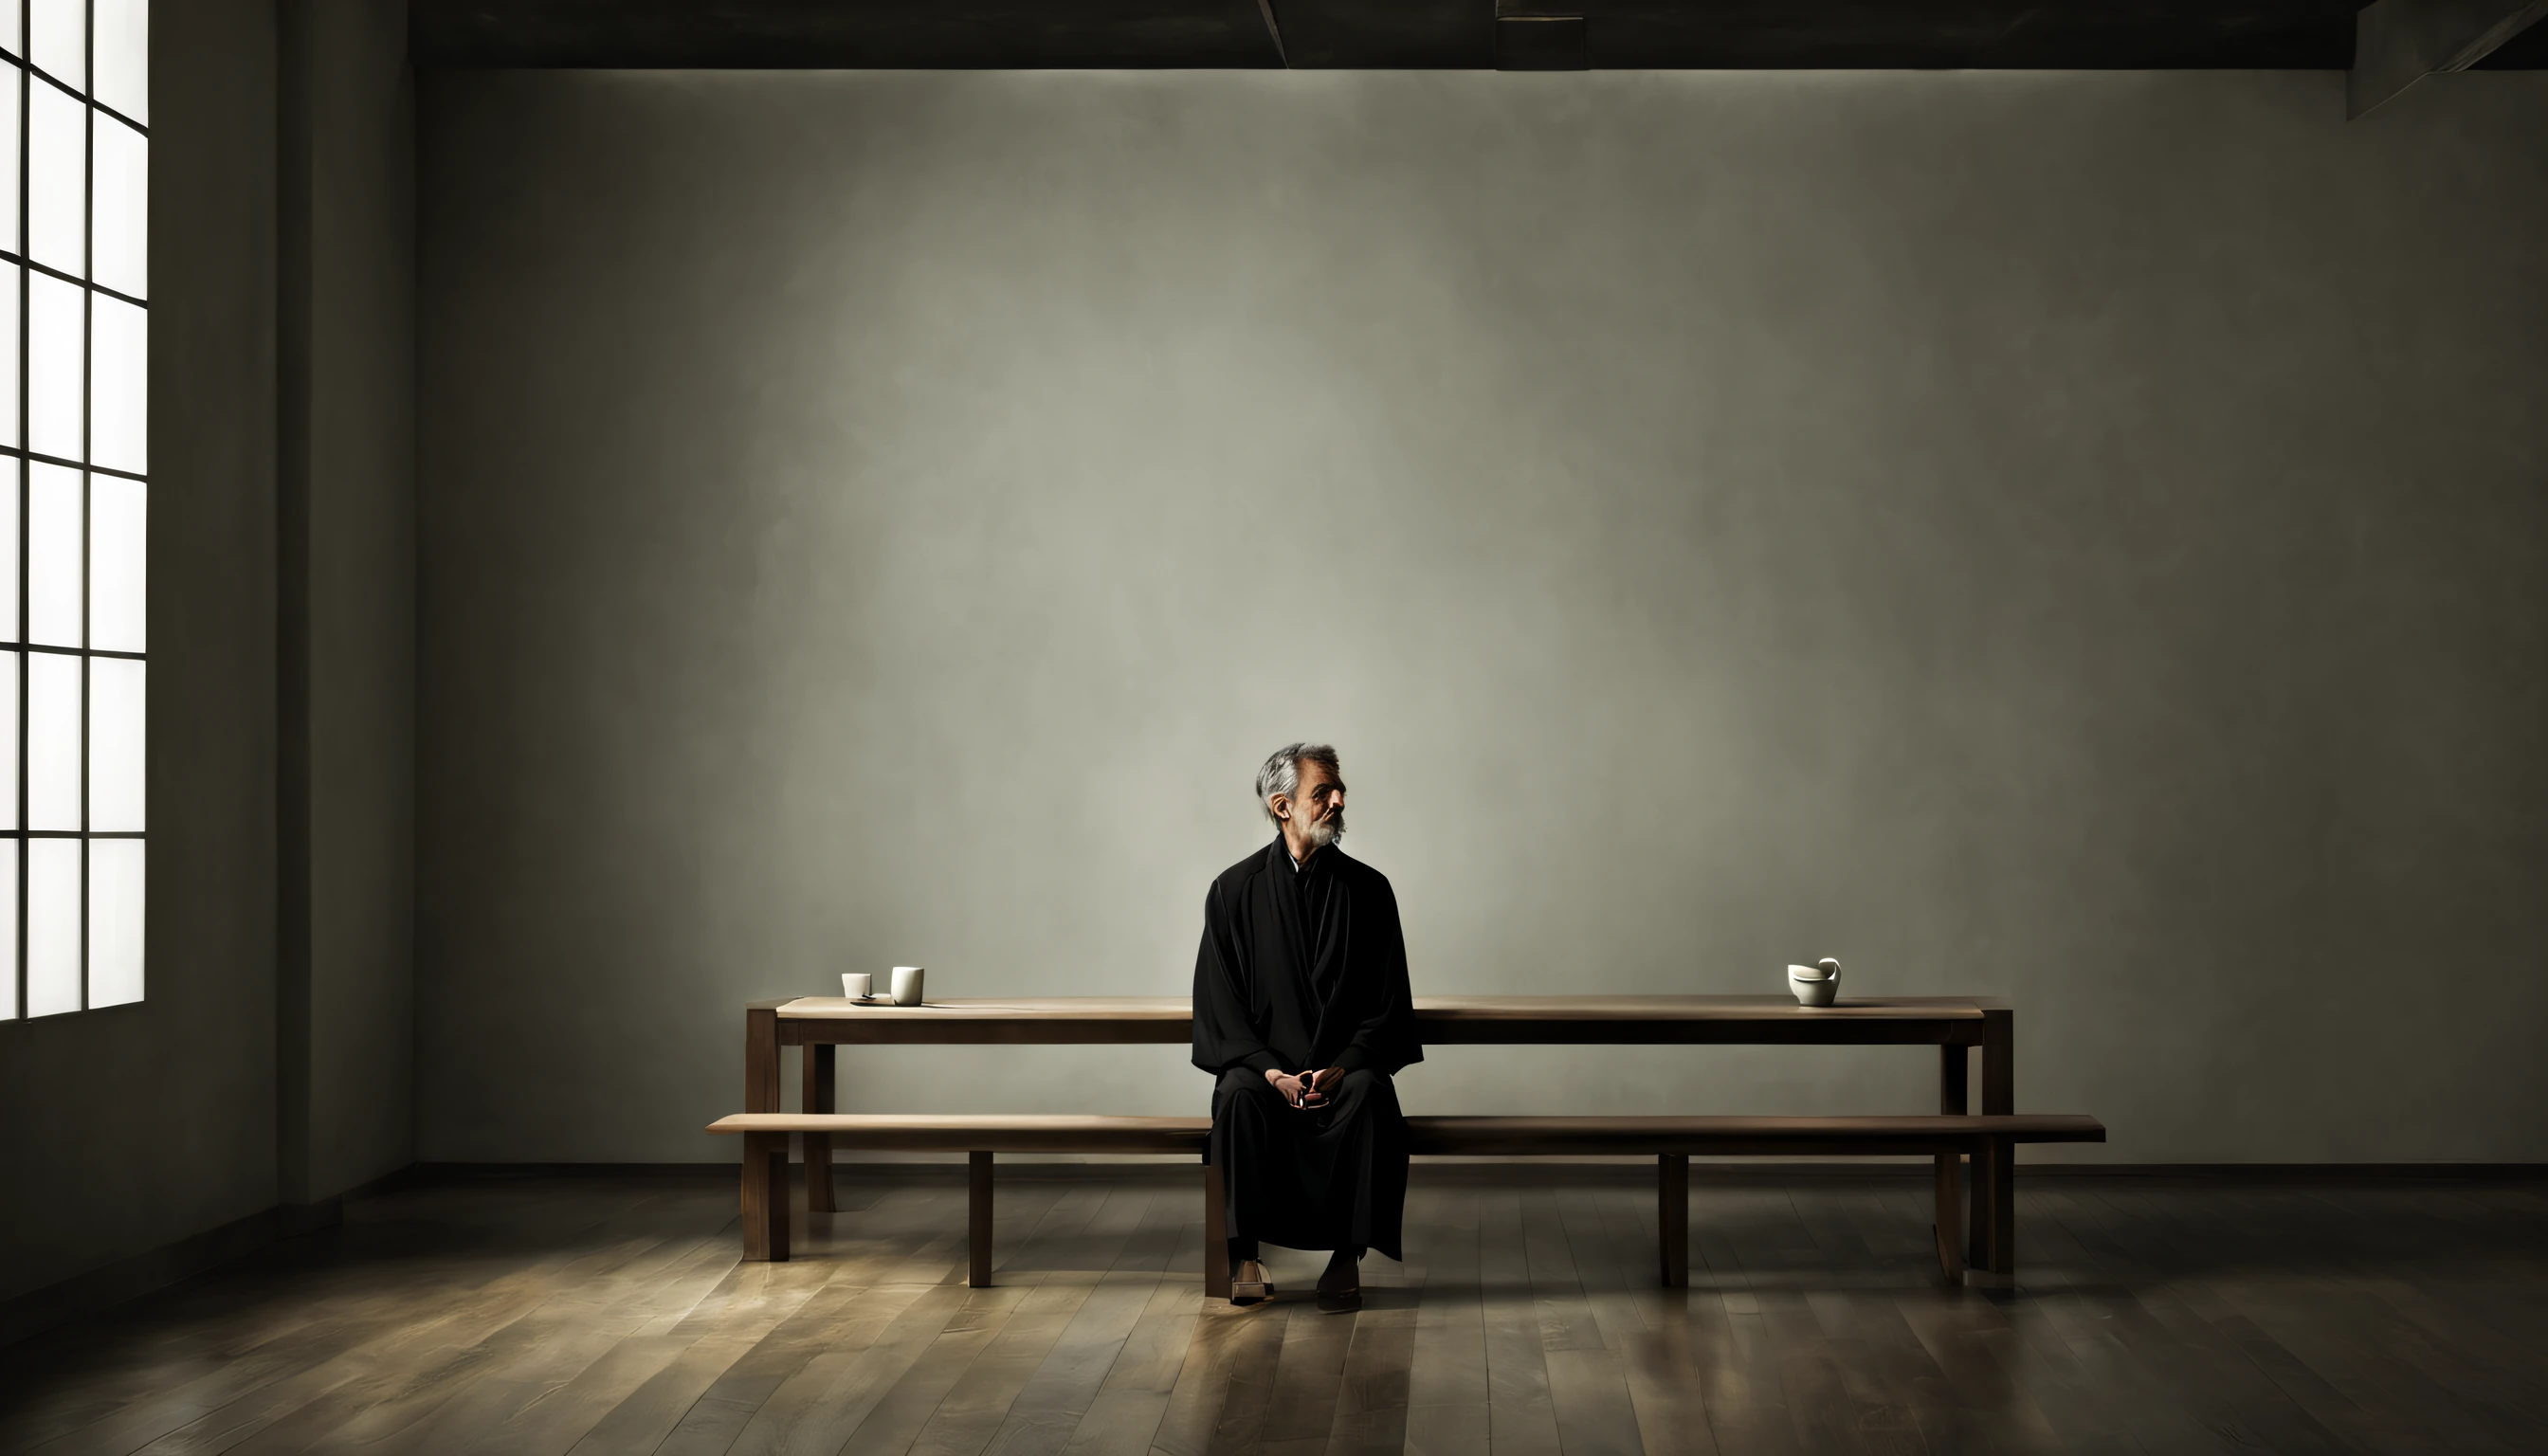 Task: Create a visual representation of a stoic individual calmly and coldly reflecting.

Instructions:

Context: Imagine a scene where a stoic person embodies the principles of stoicism by calmly and dispassionately reflecting on a situation or decision.

Scene Description: The stoic individual is in a minimalist and contemplative environment, such as a quiet room with little to no decoration. The surroundings emphasize a sense of solitude and calm.

Expression and Behavior: The stoic person is calmly and coldly reflecting on a matter, showing no overt emotional reaction. Their facial expression and body language exude a composed and unemotional demeanor.

Image Details: The scene is illuminated with soft, muted lighting, and the color palette is cool and restrained. The environment should enhance the feeling of tranquility and rational reflection.

Art Style: The desired art style is realistic, focusing on detail to convincingly portray the stoic individual's calm and rational contemplation.

Resolution and Size: The image should have a high resolution of 300 dpi and a size of 3000x4000 pixels, suitable for high-quality printing.

Deadline: The deadline for completing the image is 10 days from today.

Budget: A budget of $500 is available for the creation of this image.

Additional Notes: Ensure that the image conveys a clear message of stoicism, with the individual calmly and coldly reflecting, displaying emotional detachment, and embracing rationality and self-control in their contemplation.